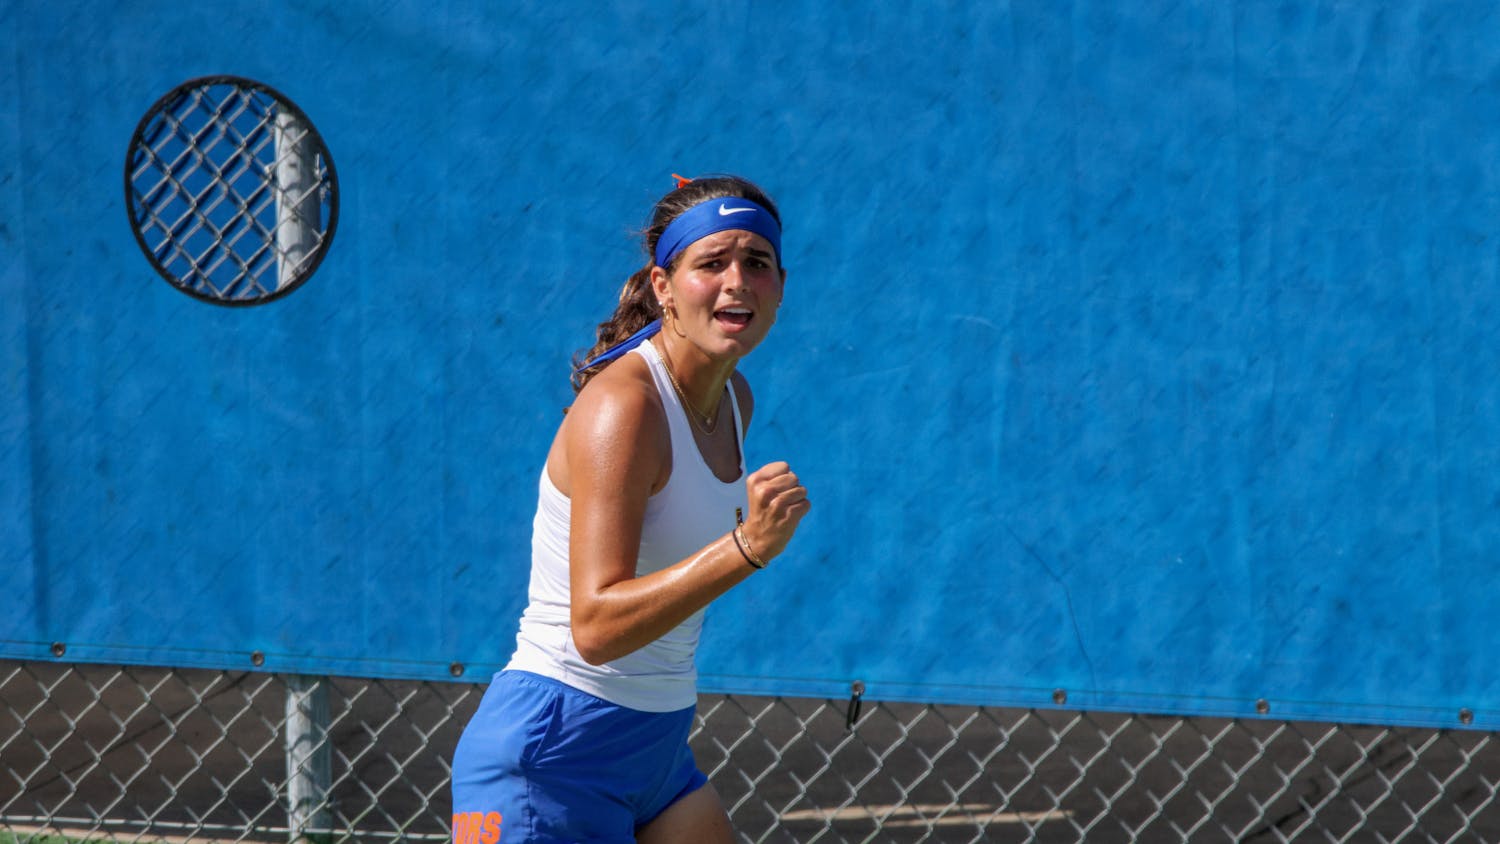 Gators sophomore Emily De Oliveira celebrates after winning a point in a 4-1 victory against the Michigan Wolverines Wednesday, March 22, 2023.